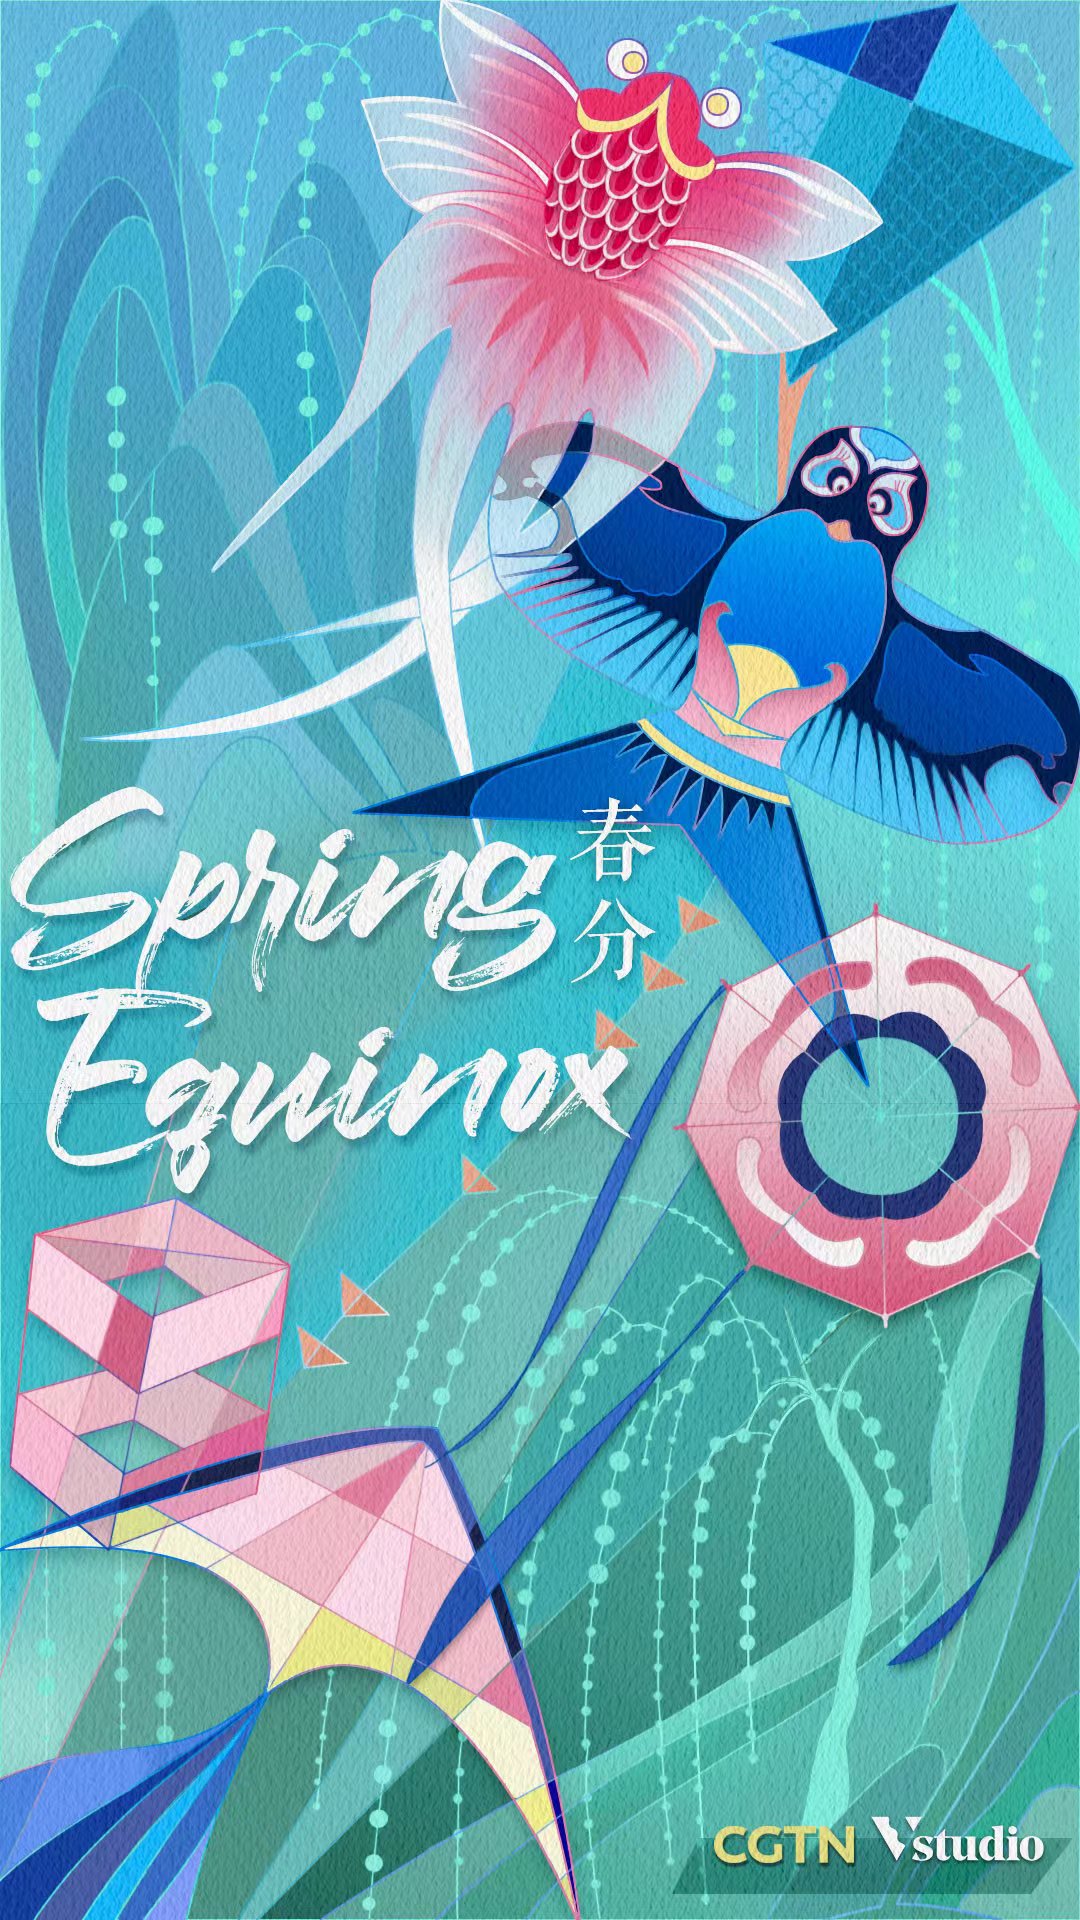 Spring Equinox denotes the equal length of the day and night time. After this date, the Northern Hemisphere begins to tilt more toward the Sun, resulting in increasing daylight hours and warmer temperatures. Let's have an outing in this lovely spring！